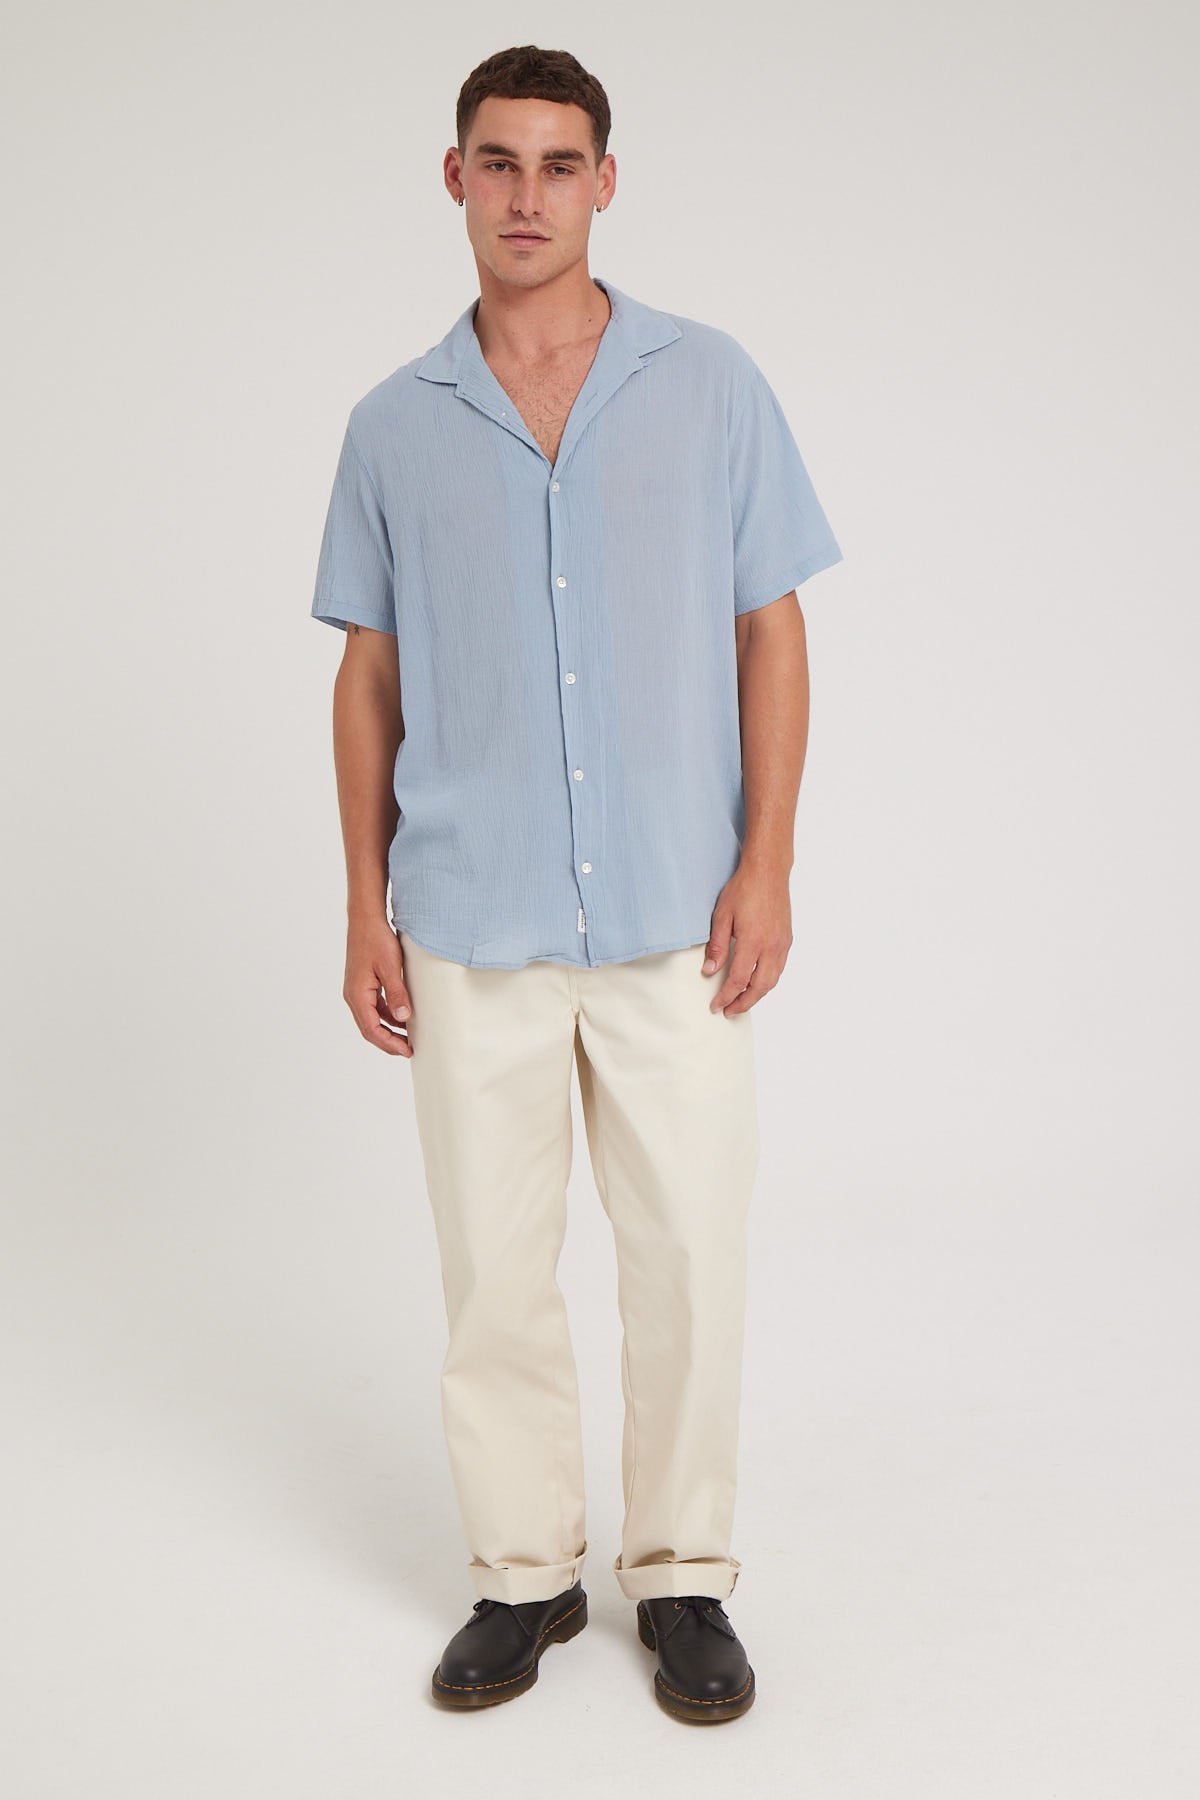 Academy Brand Bedford Shirt Pearl Blue – Universal Store